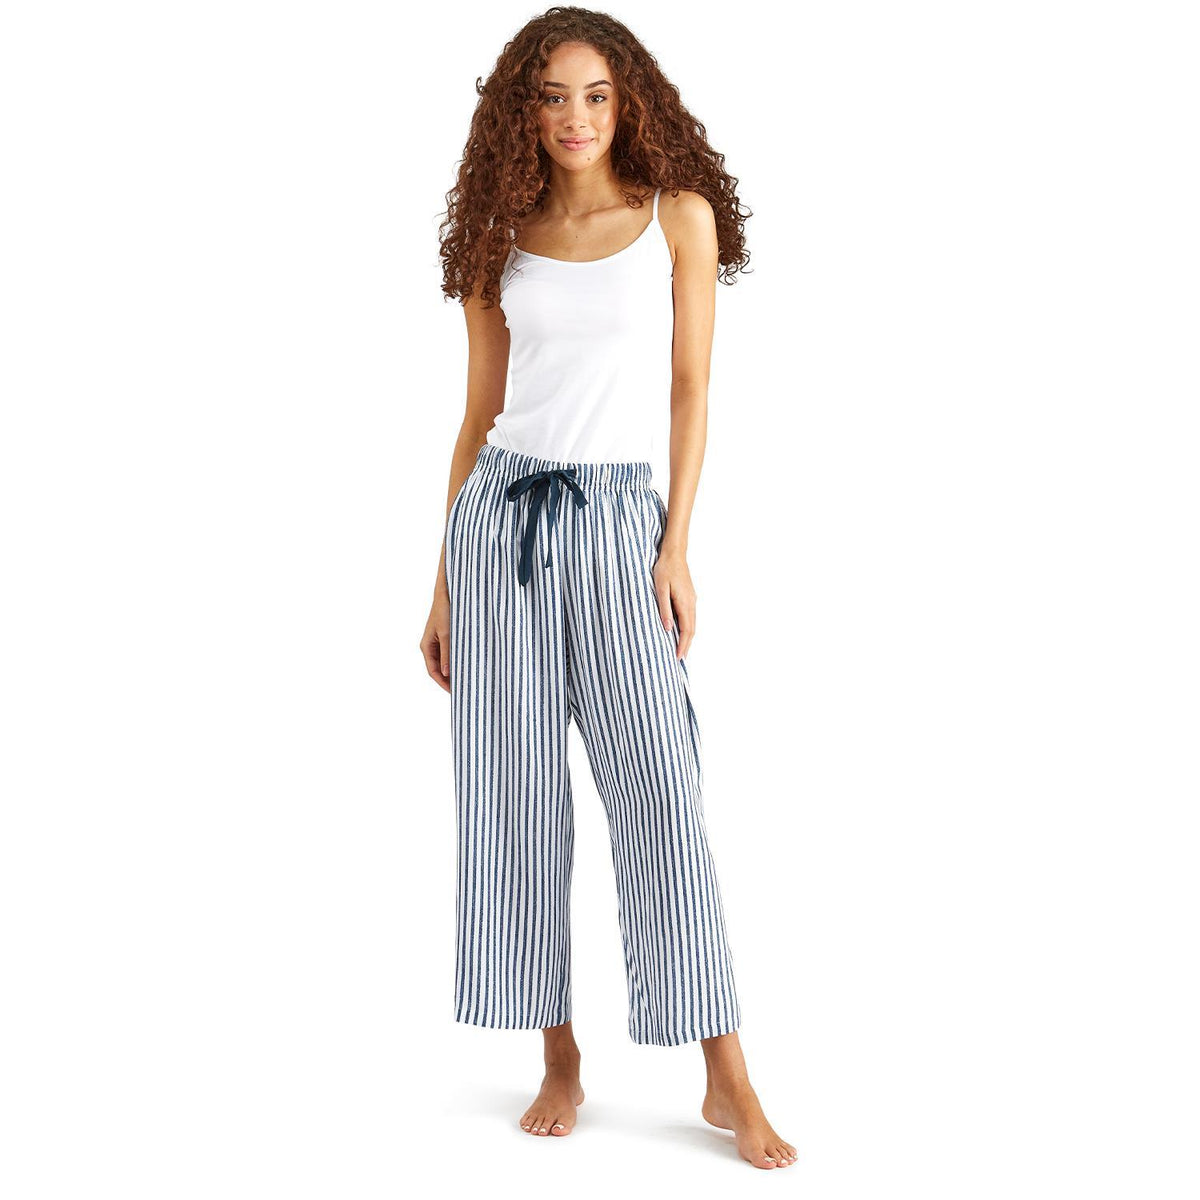 Deluxe Lounge Pants with Stretch Drawstring Waistband